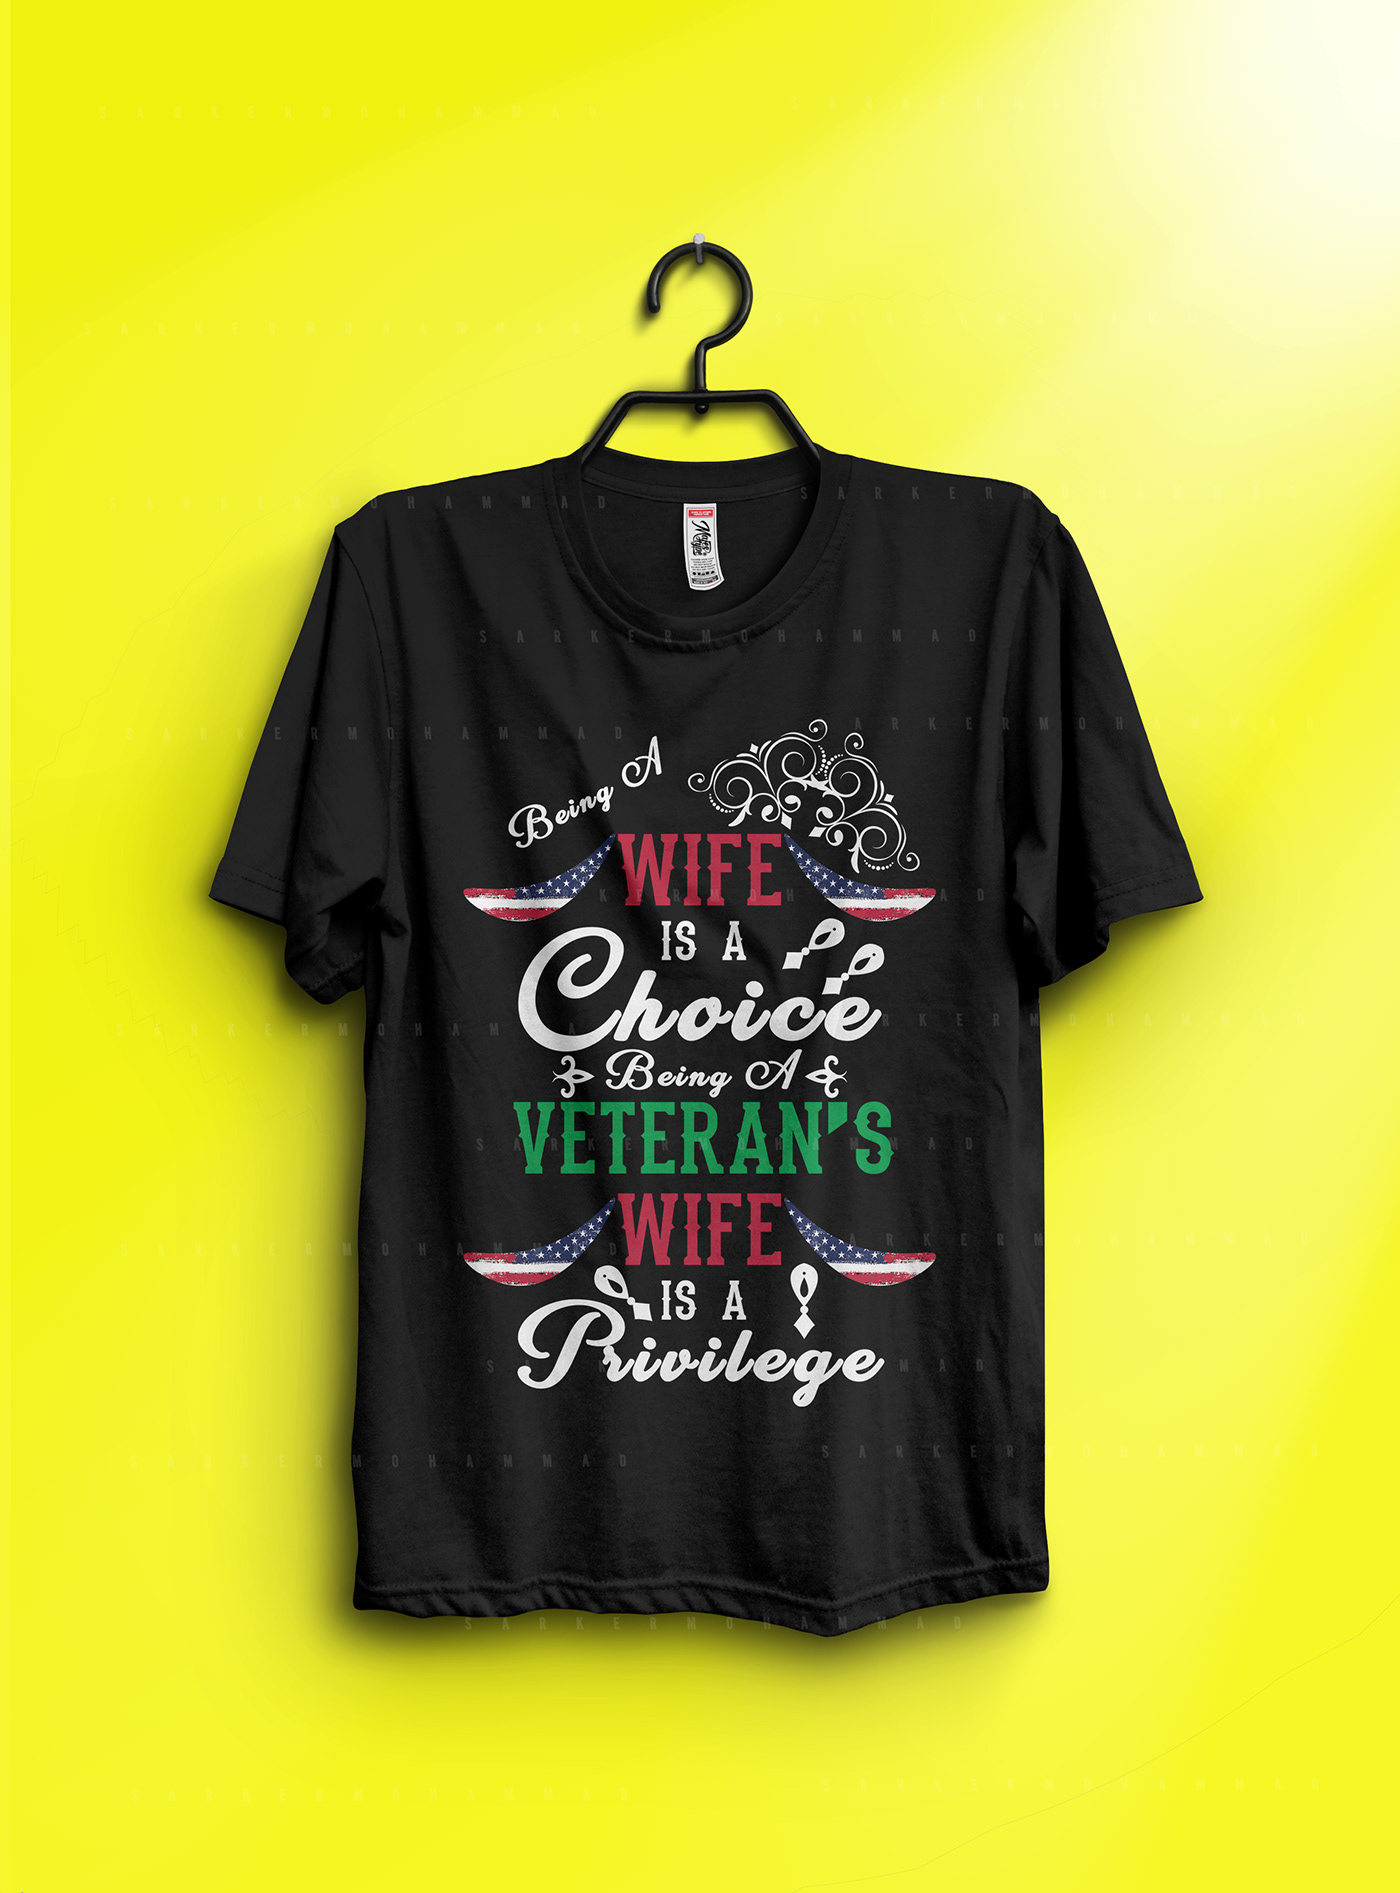 amaerican t-shirt father's day tshirt funny veteran t-shirts military veteran shirts navy veteran shirts peru veteran polo shirts teespring veteran Veteran T-Shirt Veterans Day